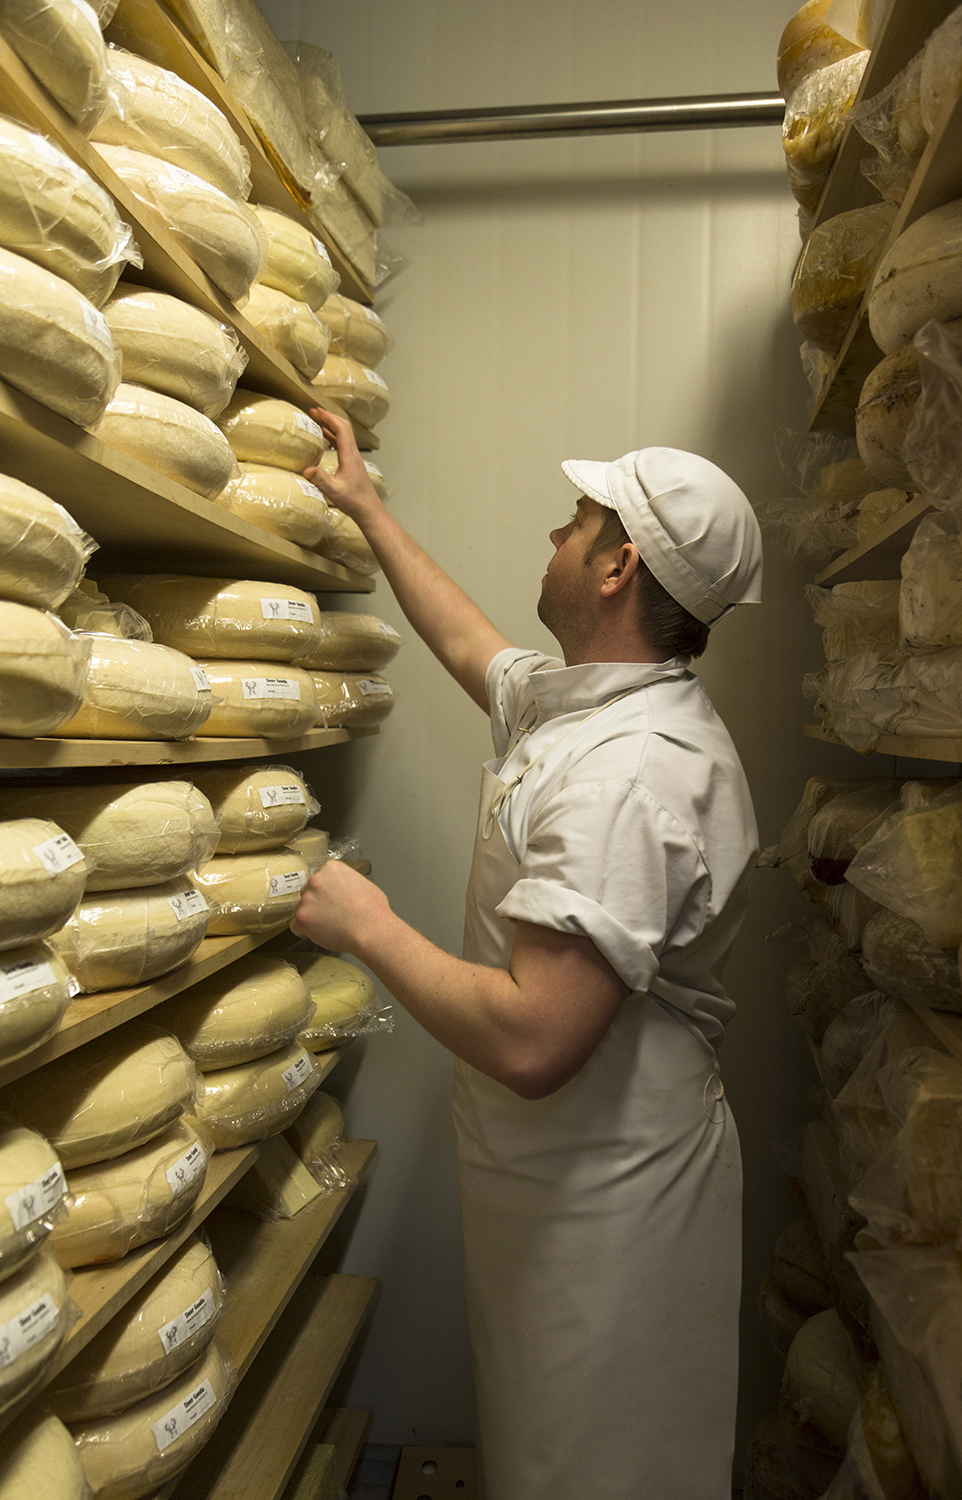 Geraldine factory worker storing cheese to be aged